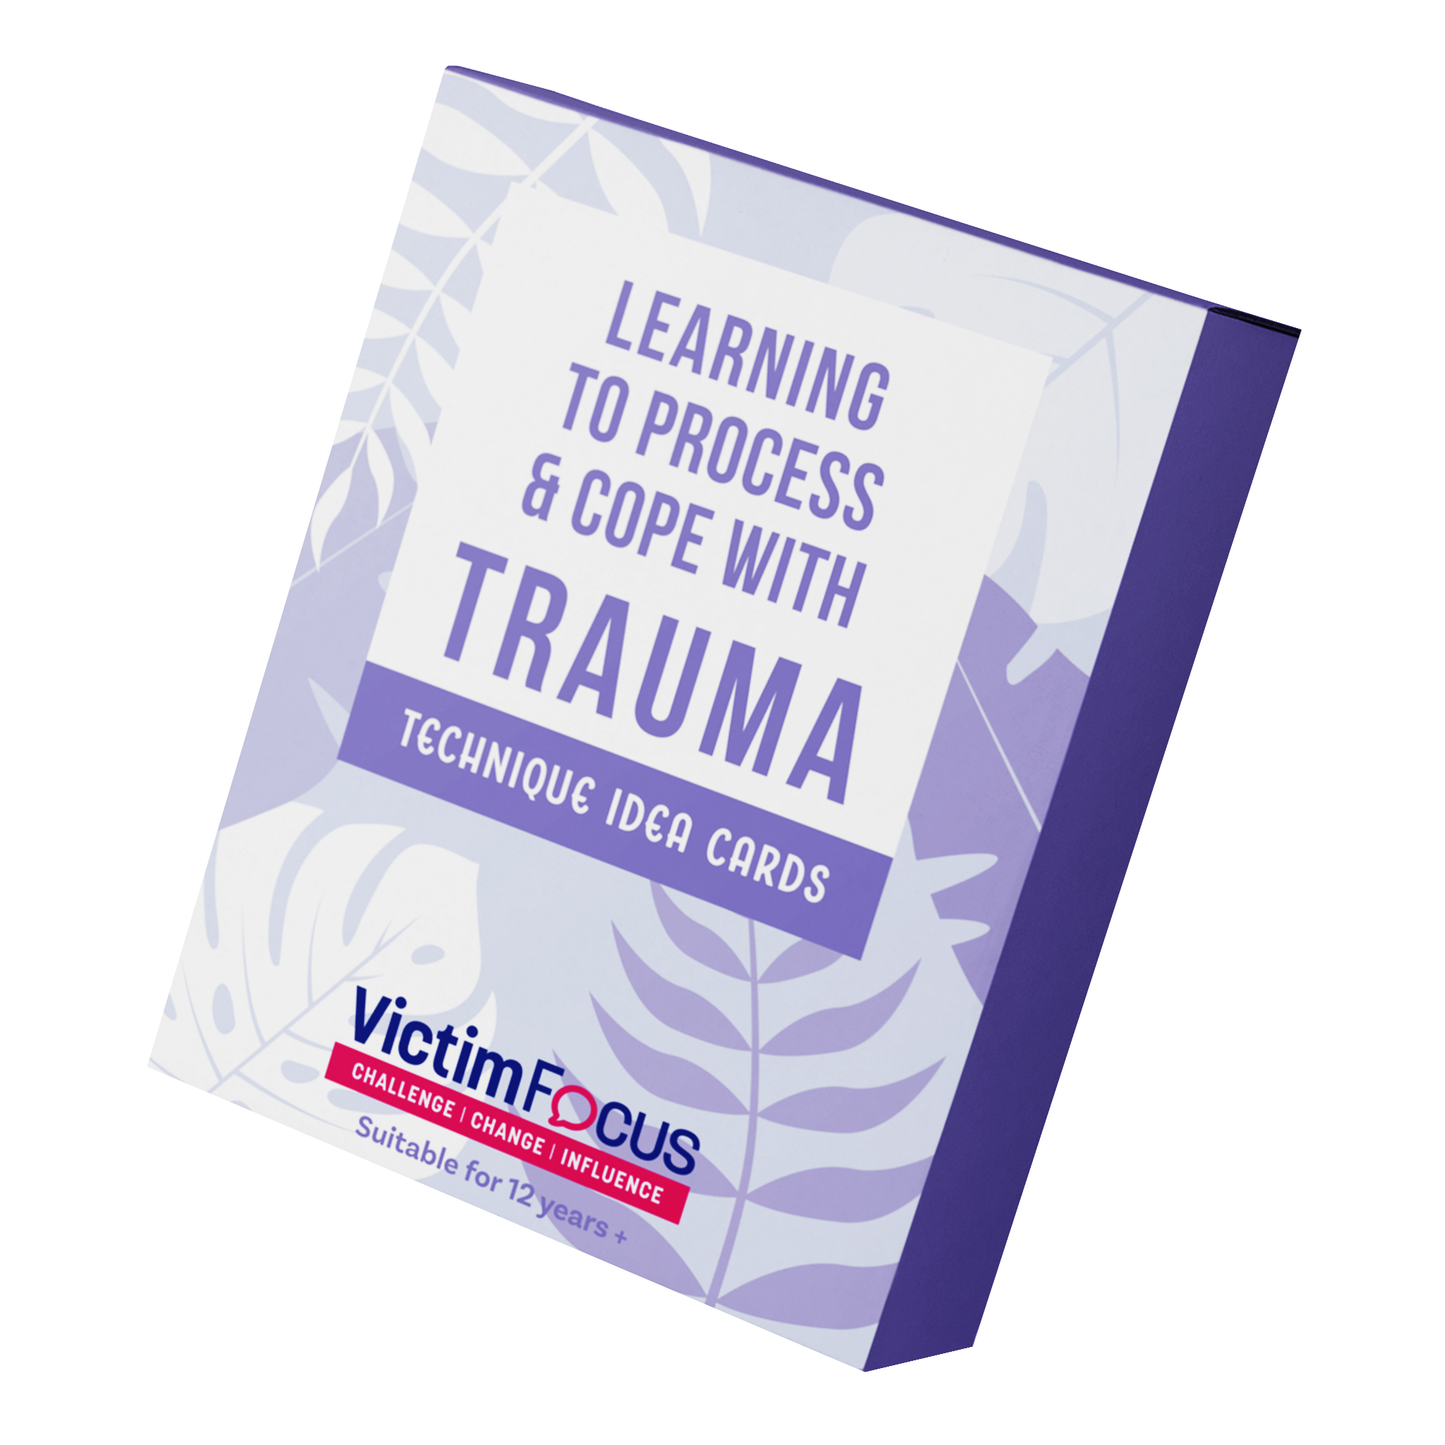 Learning to process and cope with trauma: Ideas and techniques